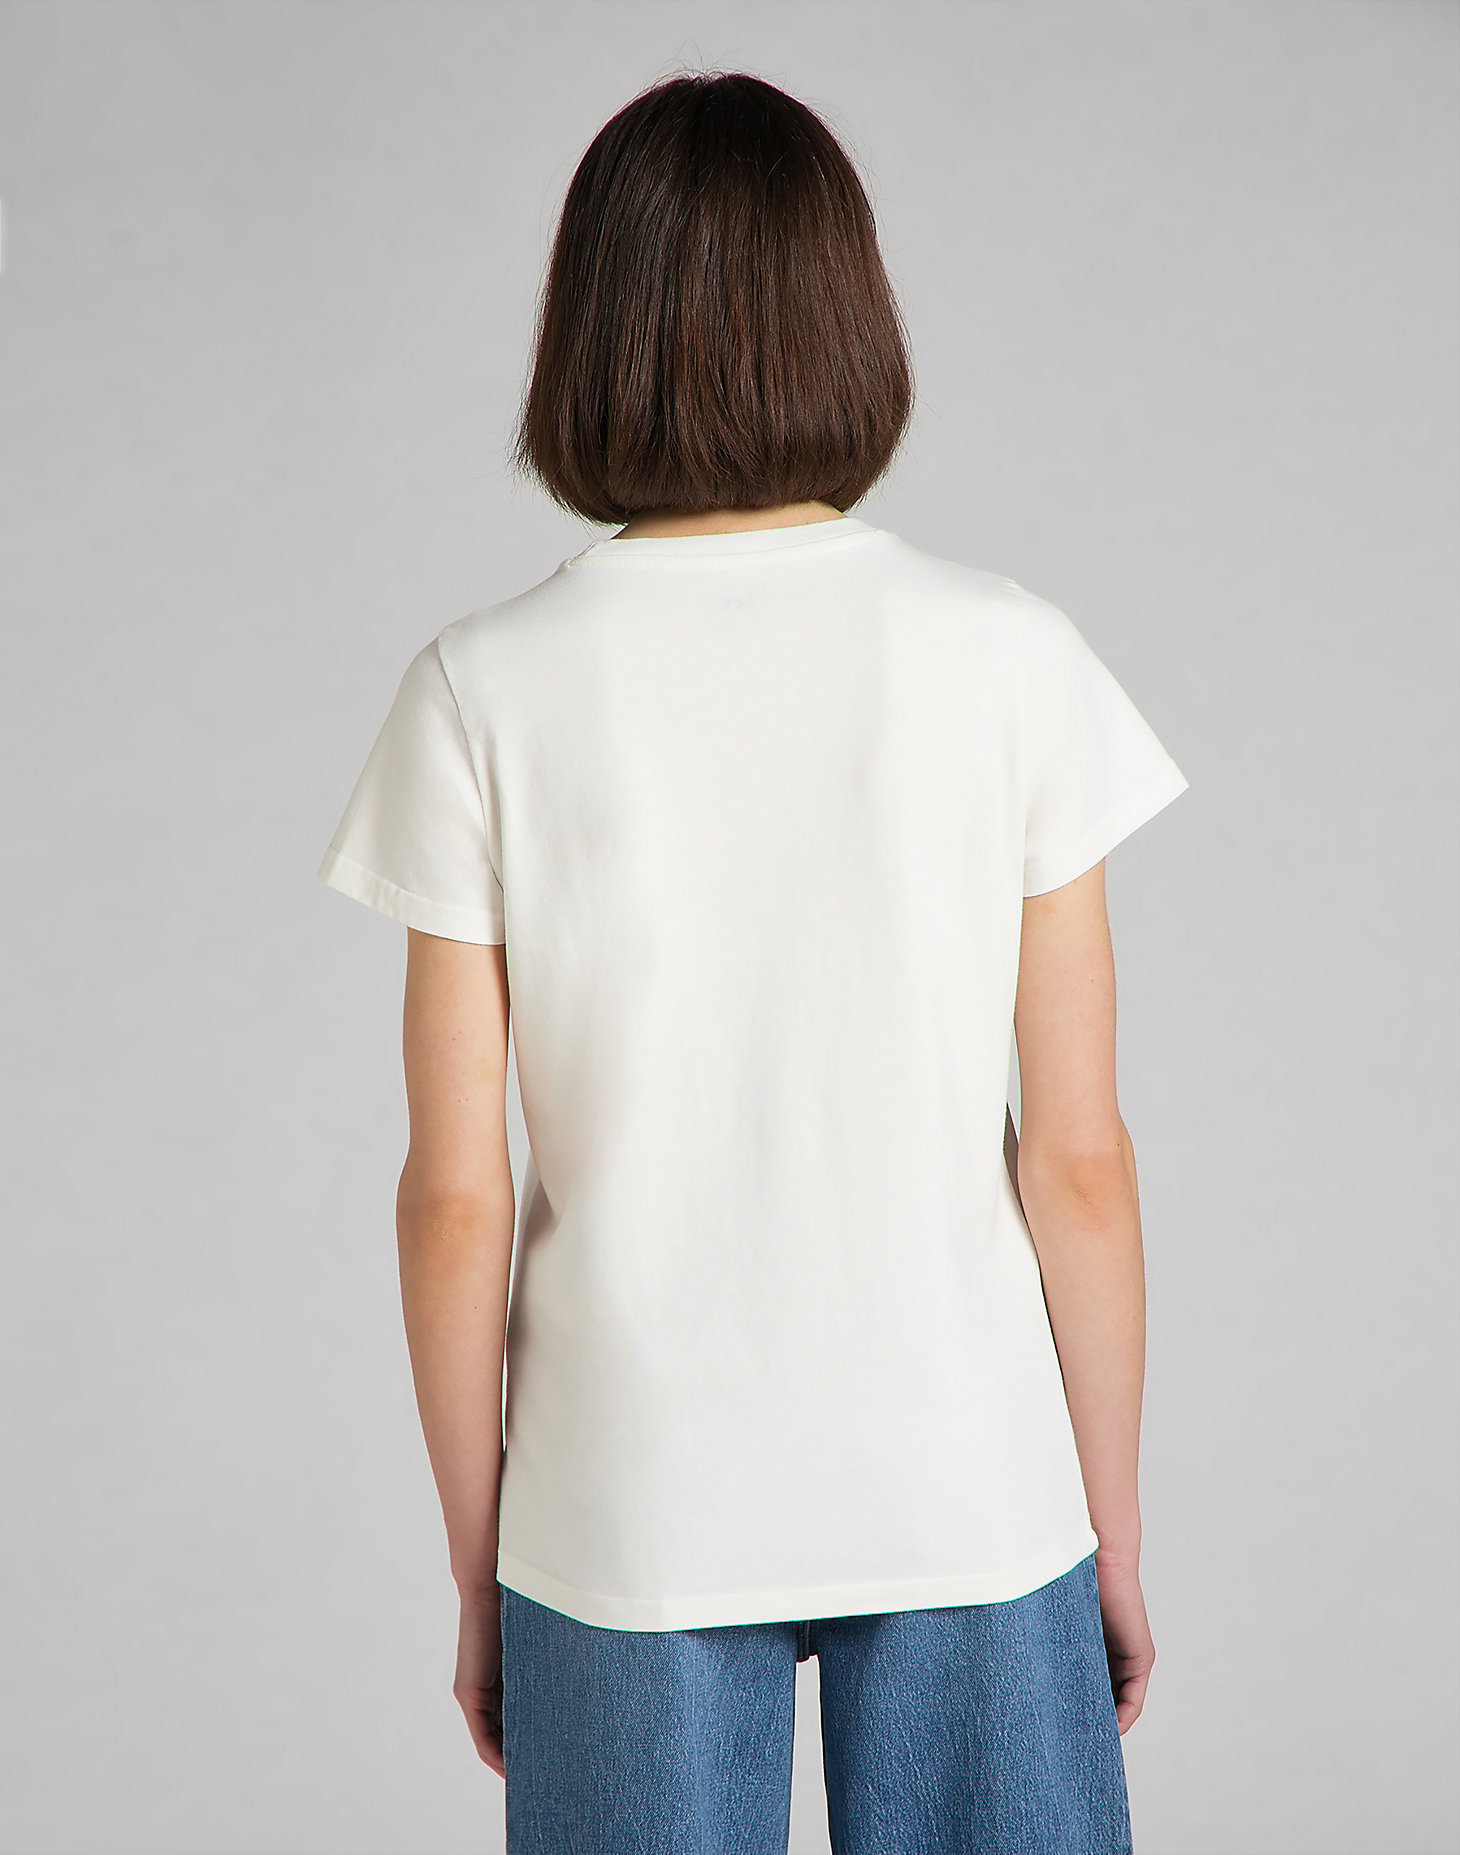 Easy Graphic Tee in White Canvas alternative view 1